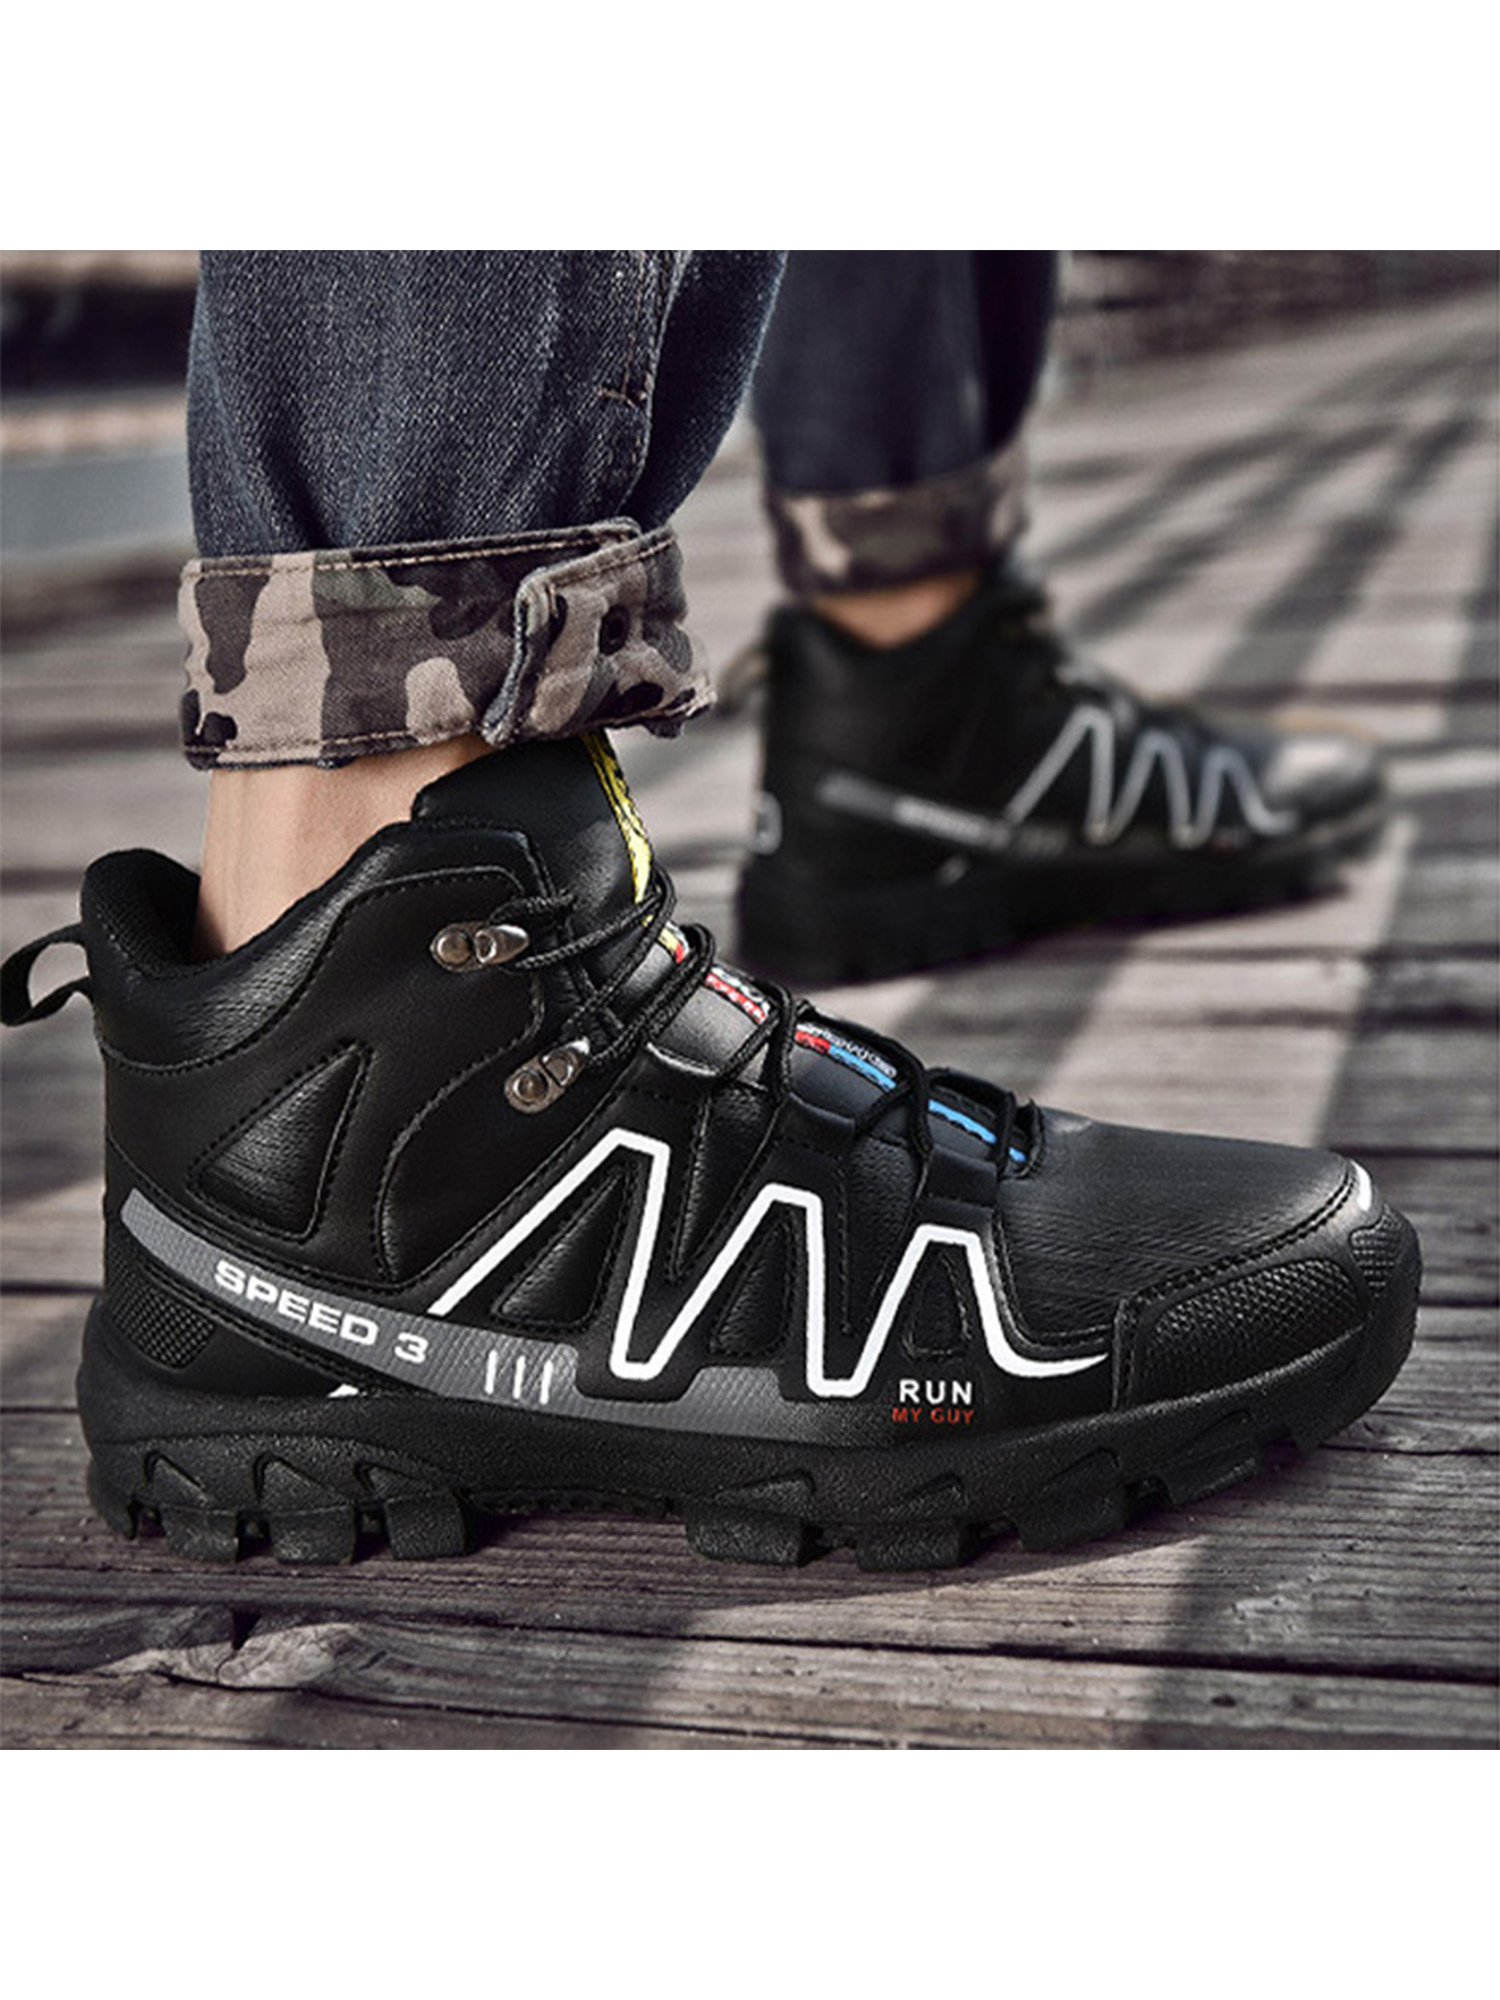 Avamo Steel Toe Sneakers for Men Waterproof Safety Shoes Slip Resistant Work Sneaker Breathable Puncture Proof Shoes-High Tops - image 1 of 10